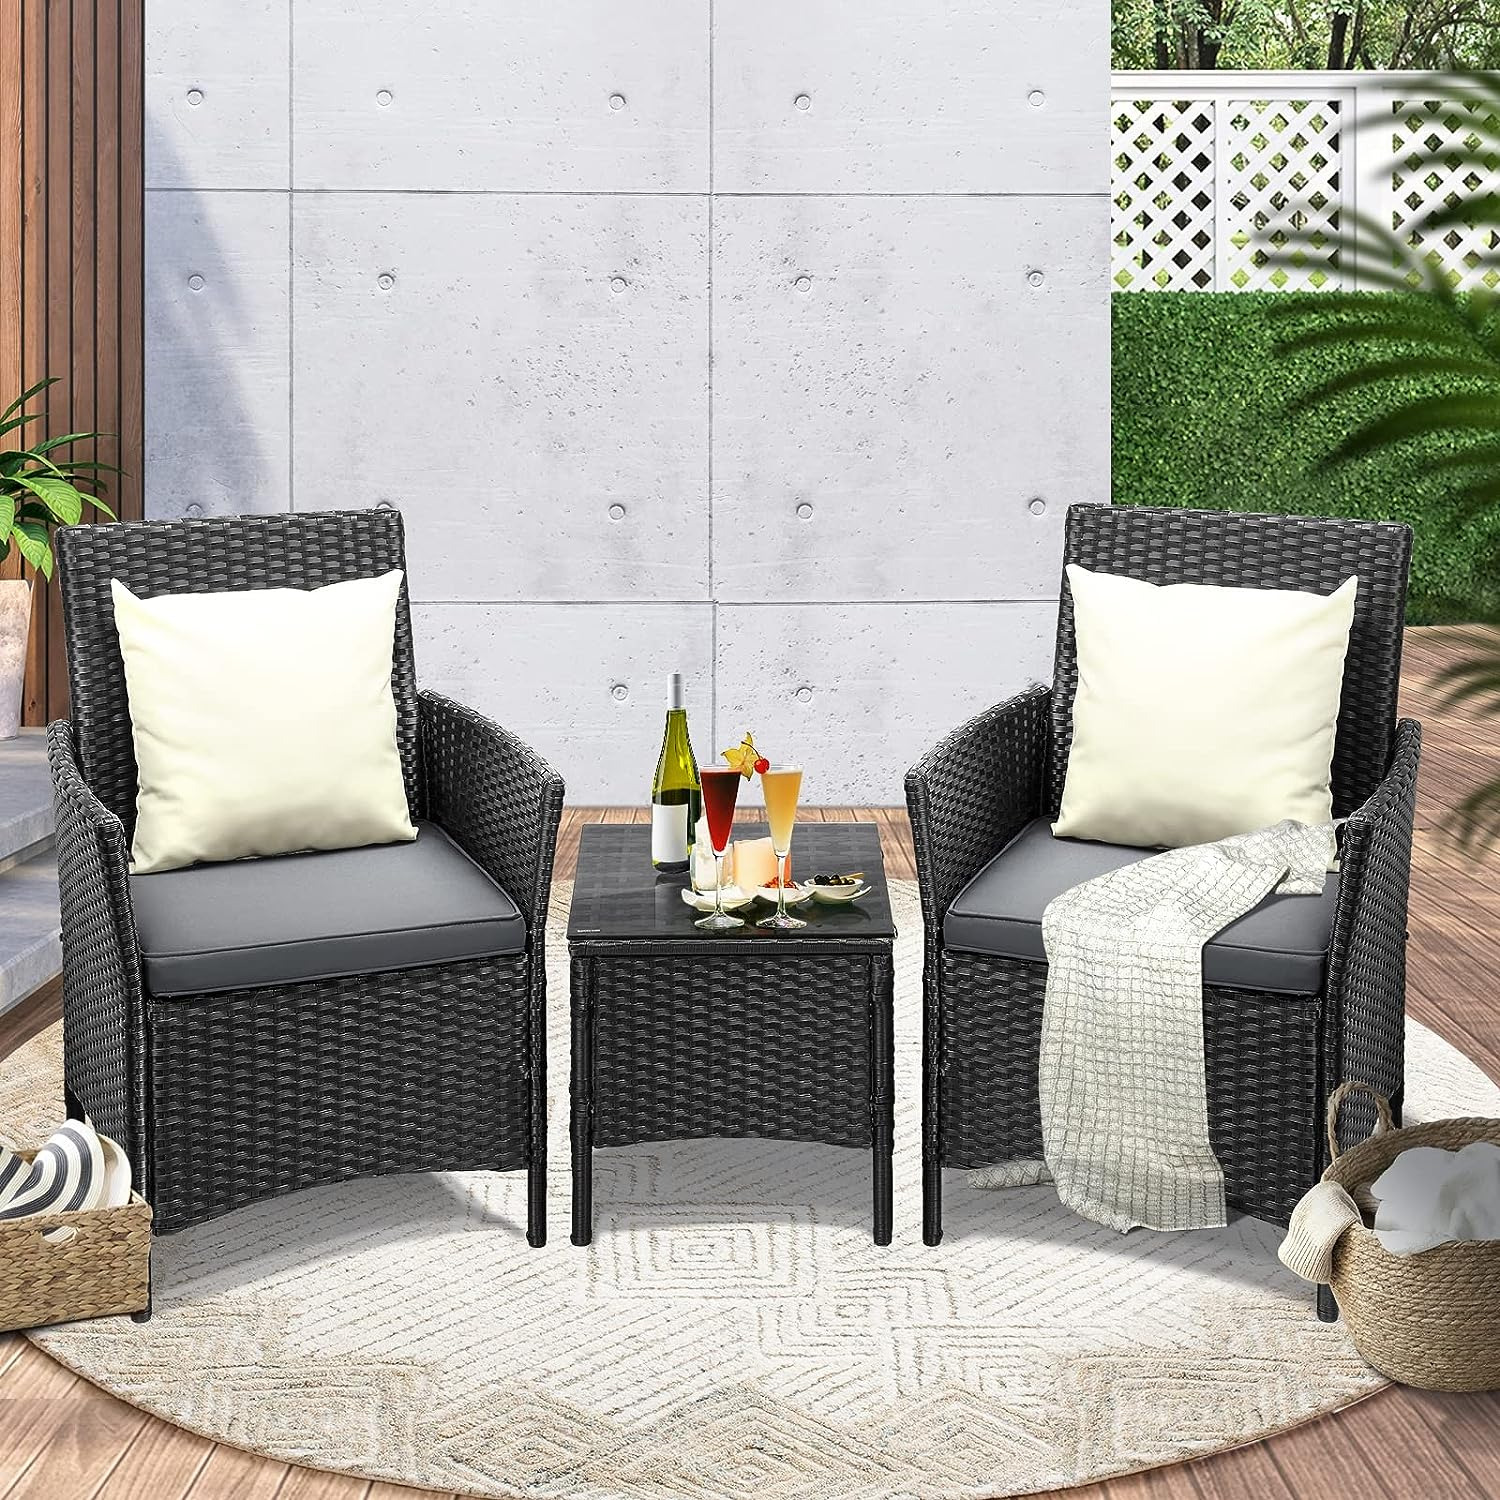 Livsip Garden Setting Outdoor Furniture Chairs and Table with Pollow 3Pcs Black